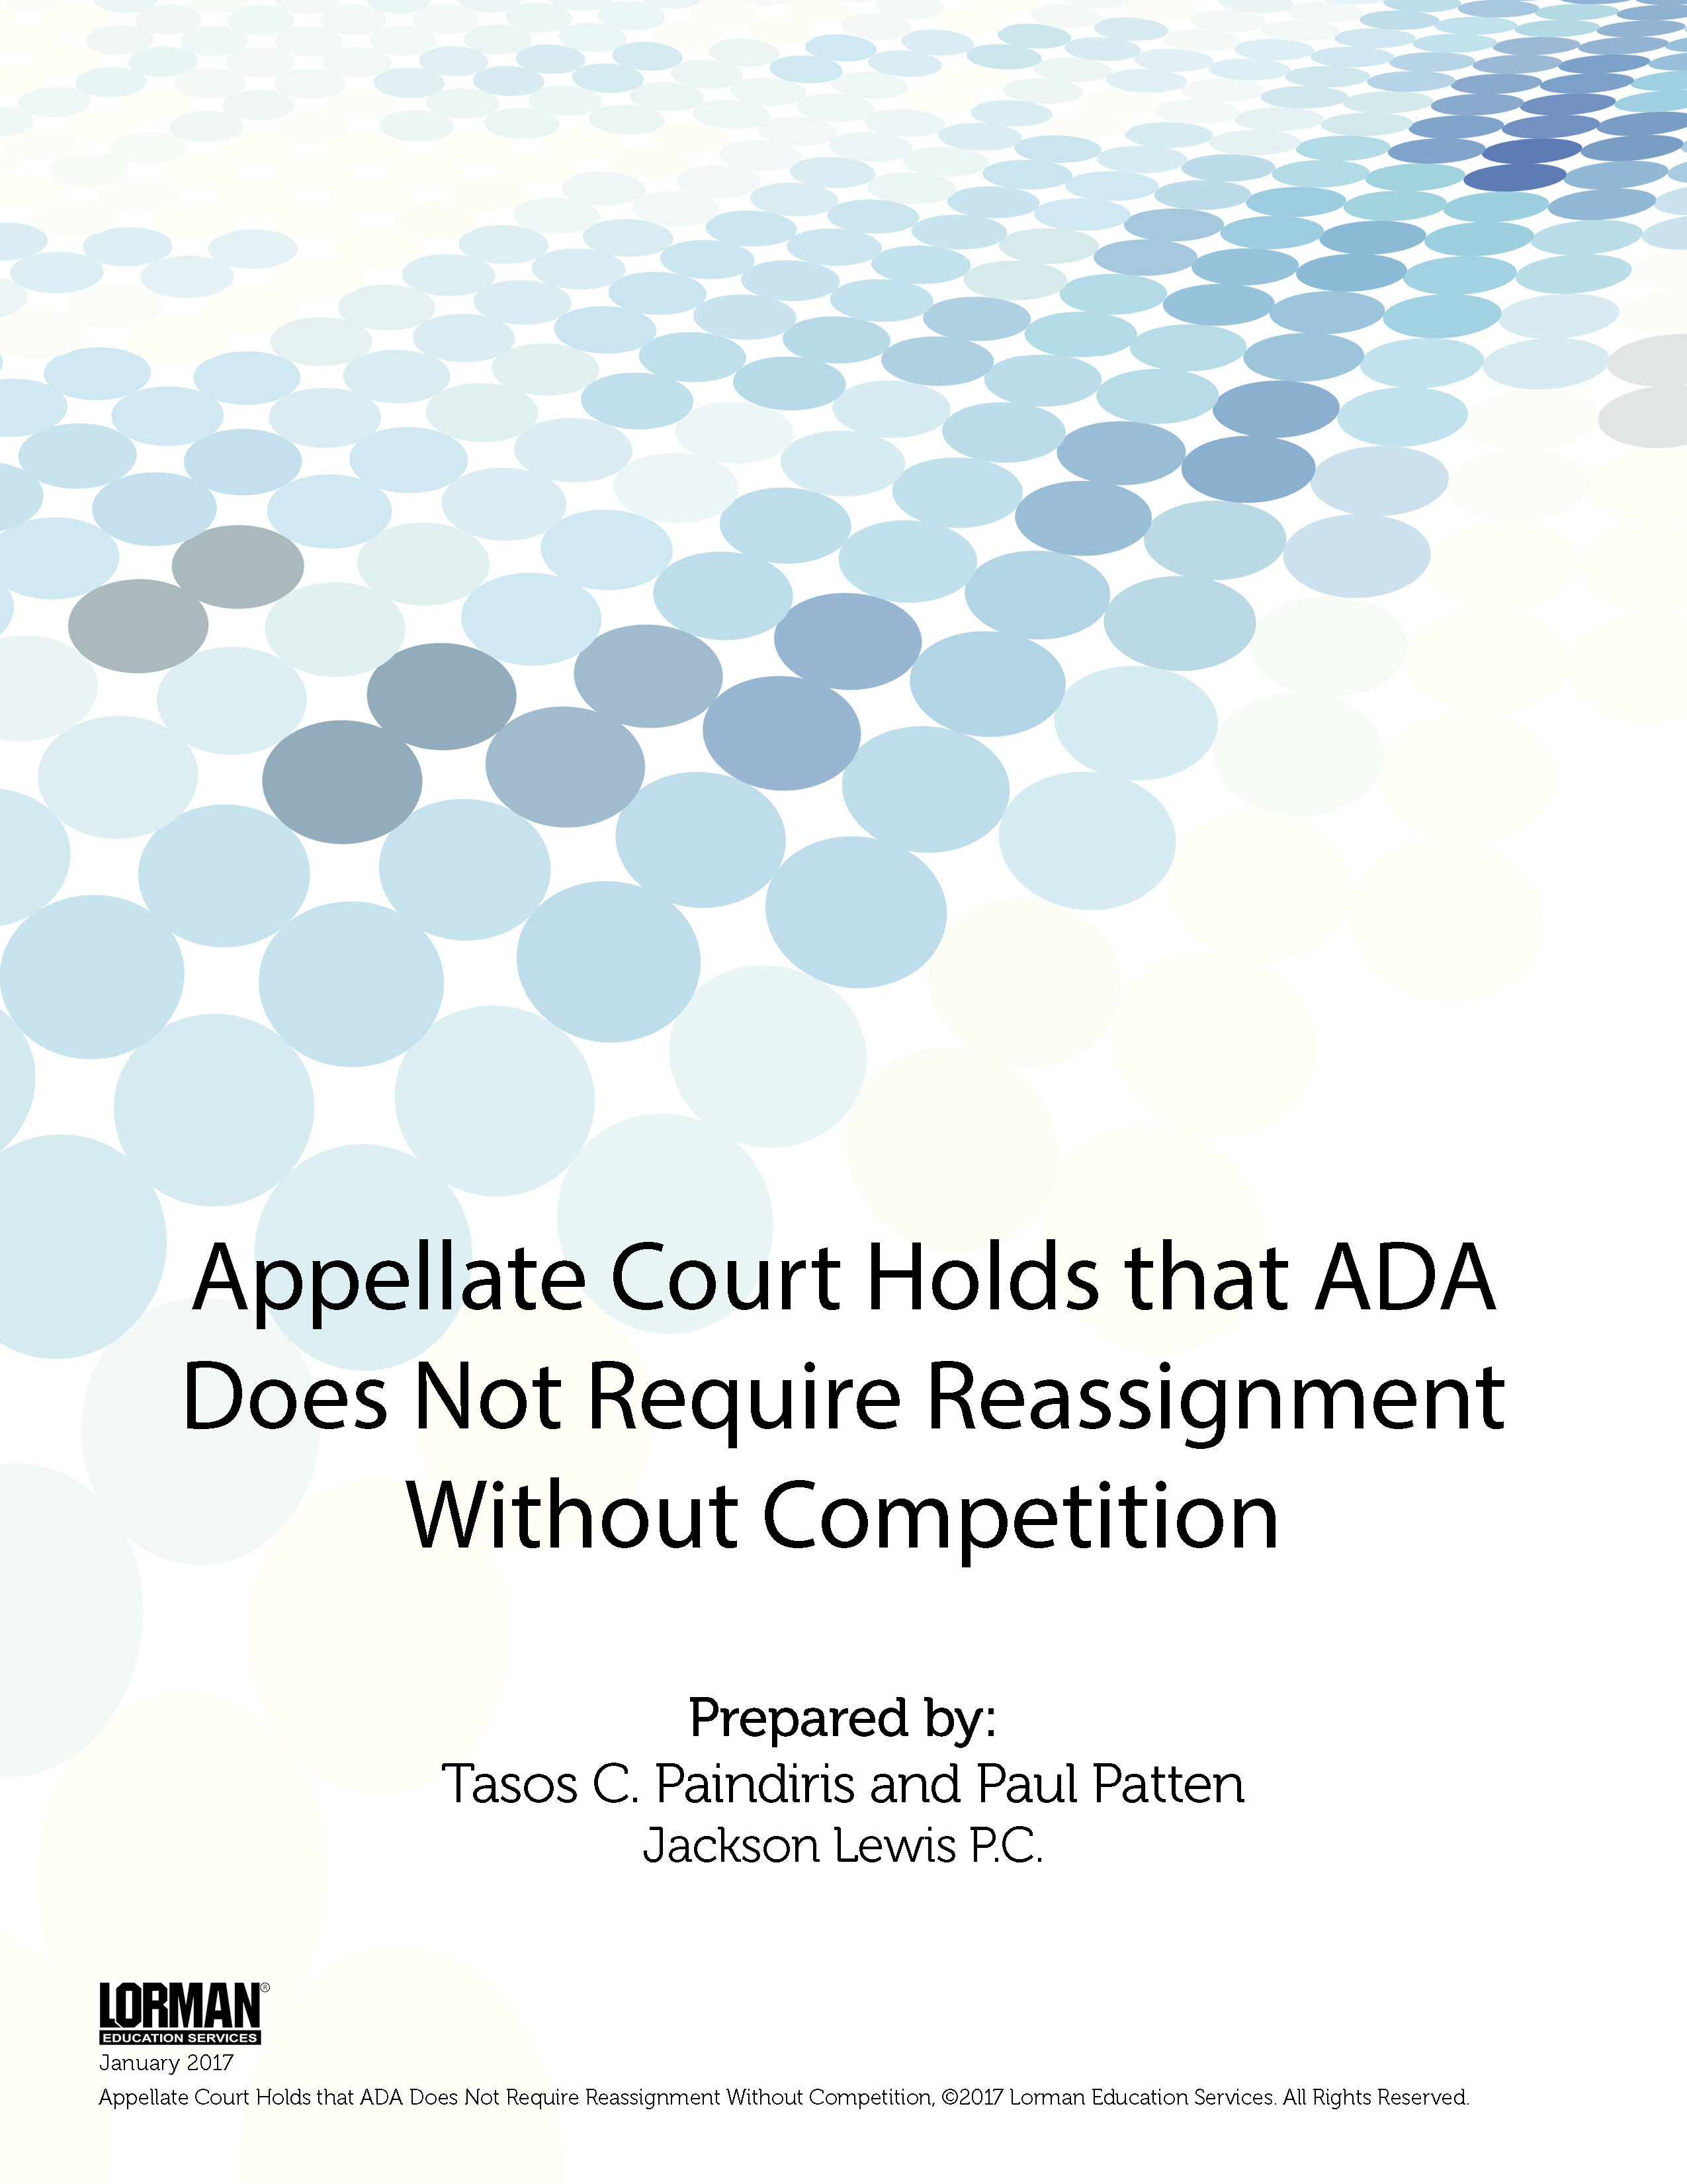 Appellate Court Holds that ADA Does Not Require Reassignment Without Competition